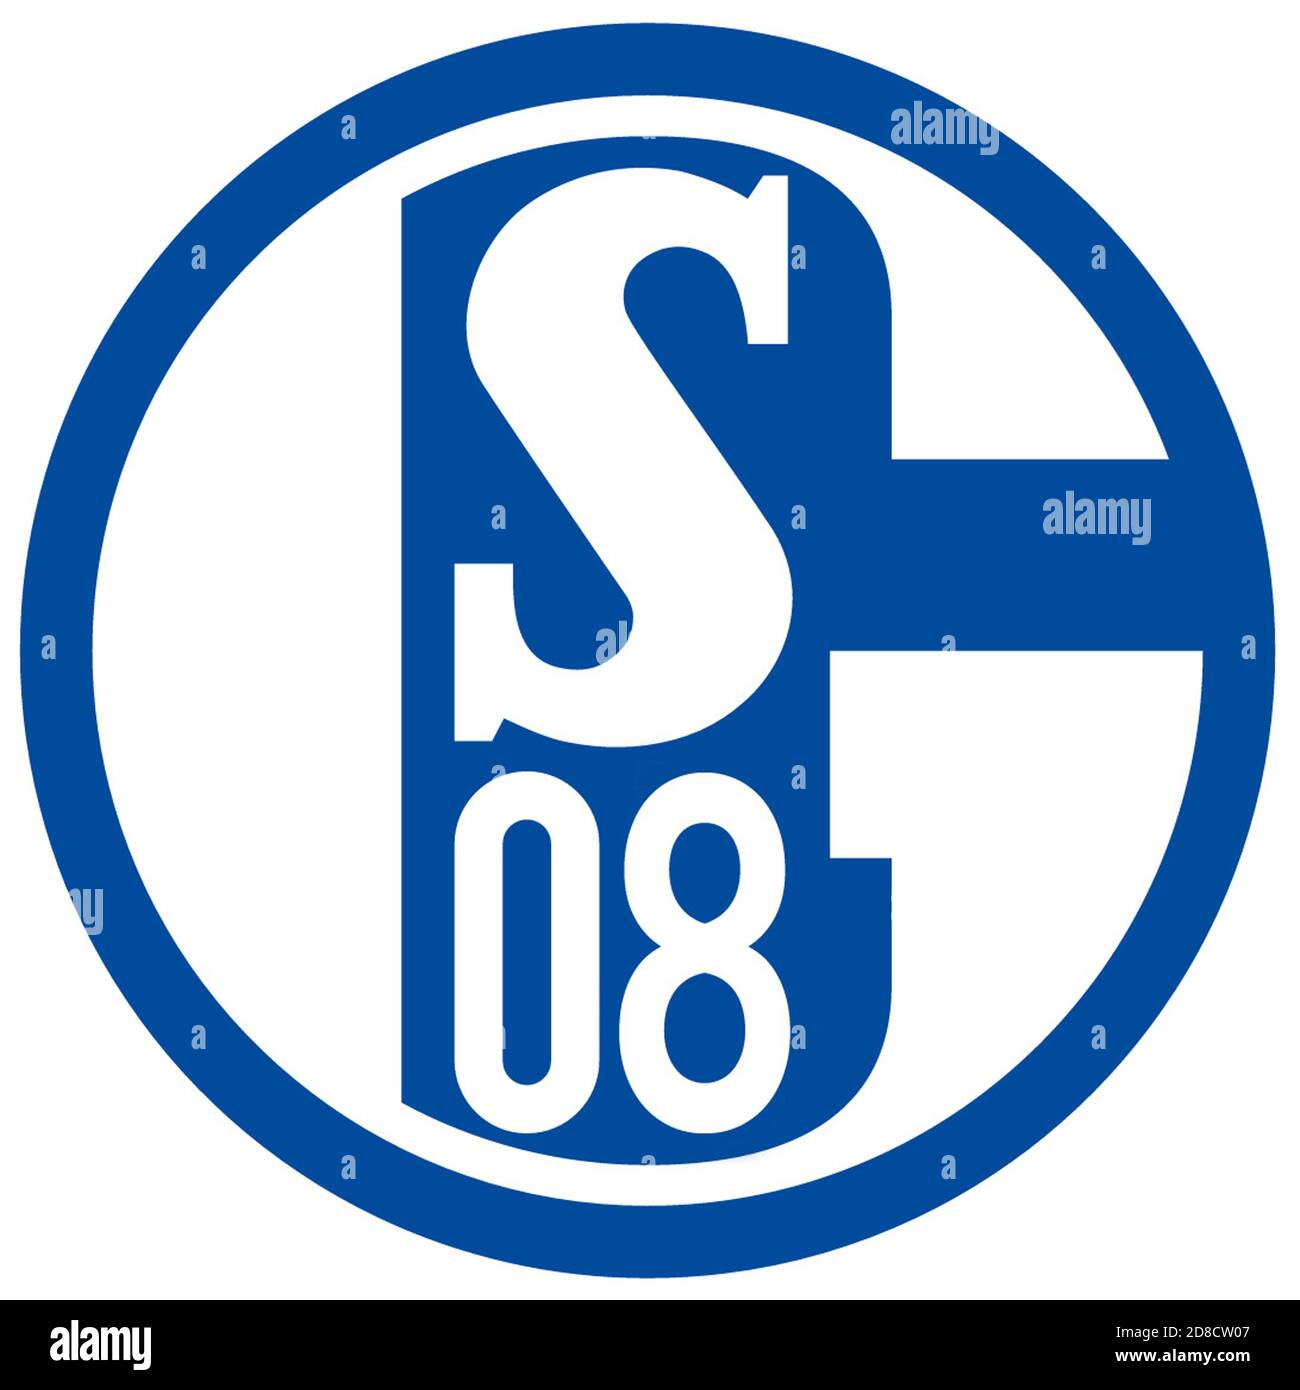 modified club logo, FC Schalke 08, after the 0 to 8 defeat against FC Bayern Muenchen on 18.09.2020 at the start of the 58th Bundesliga season, Stock Photo